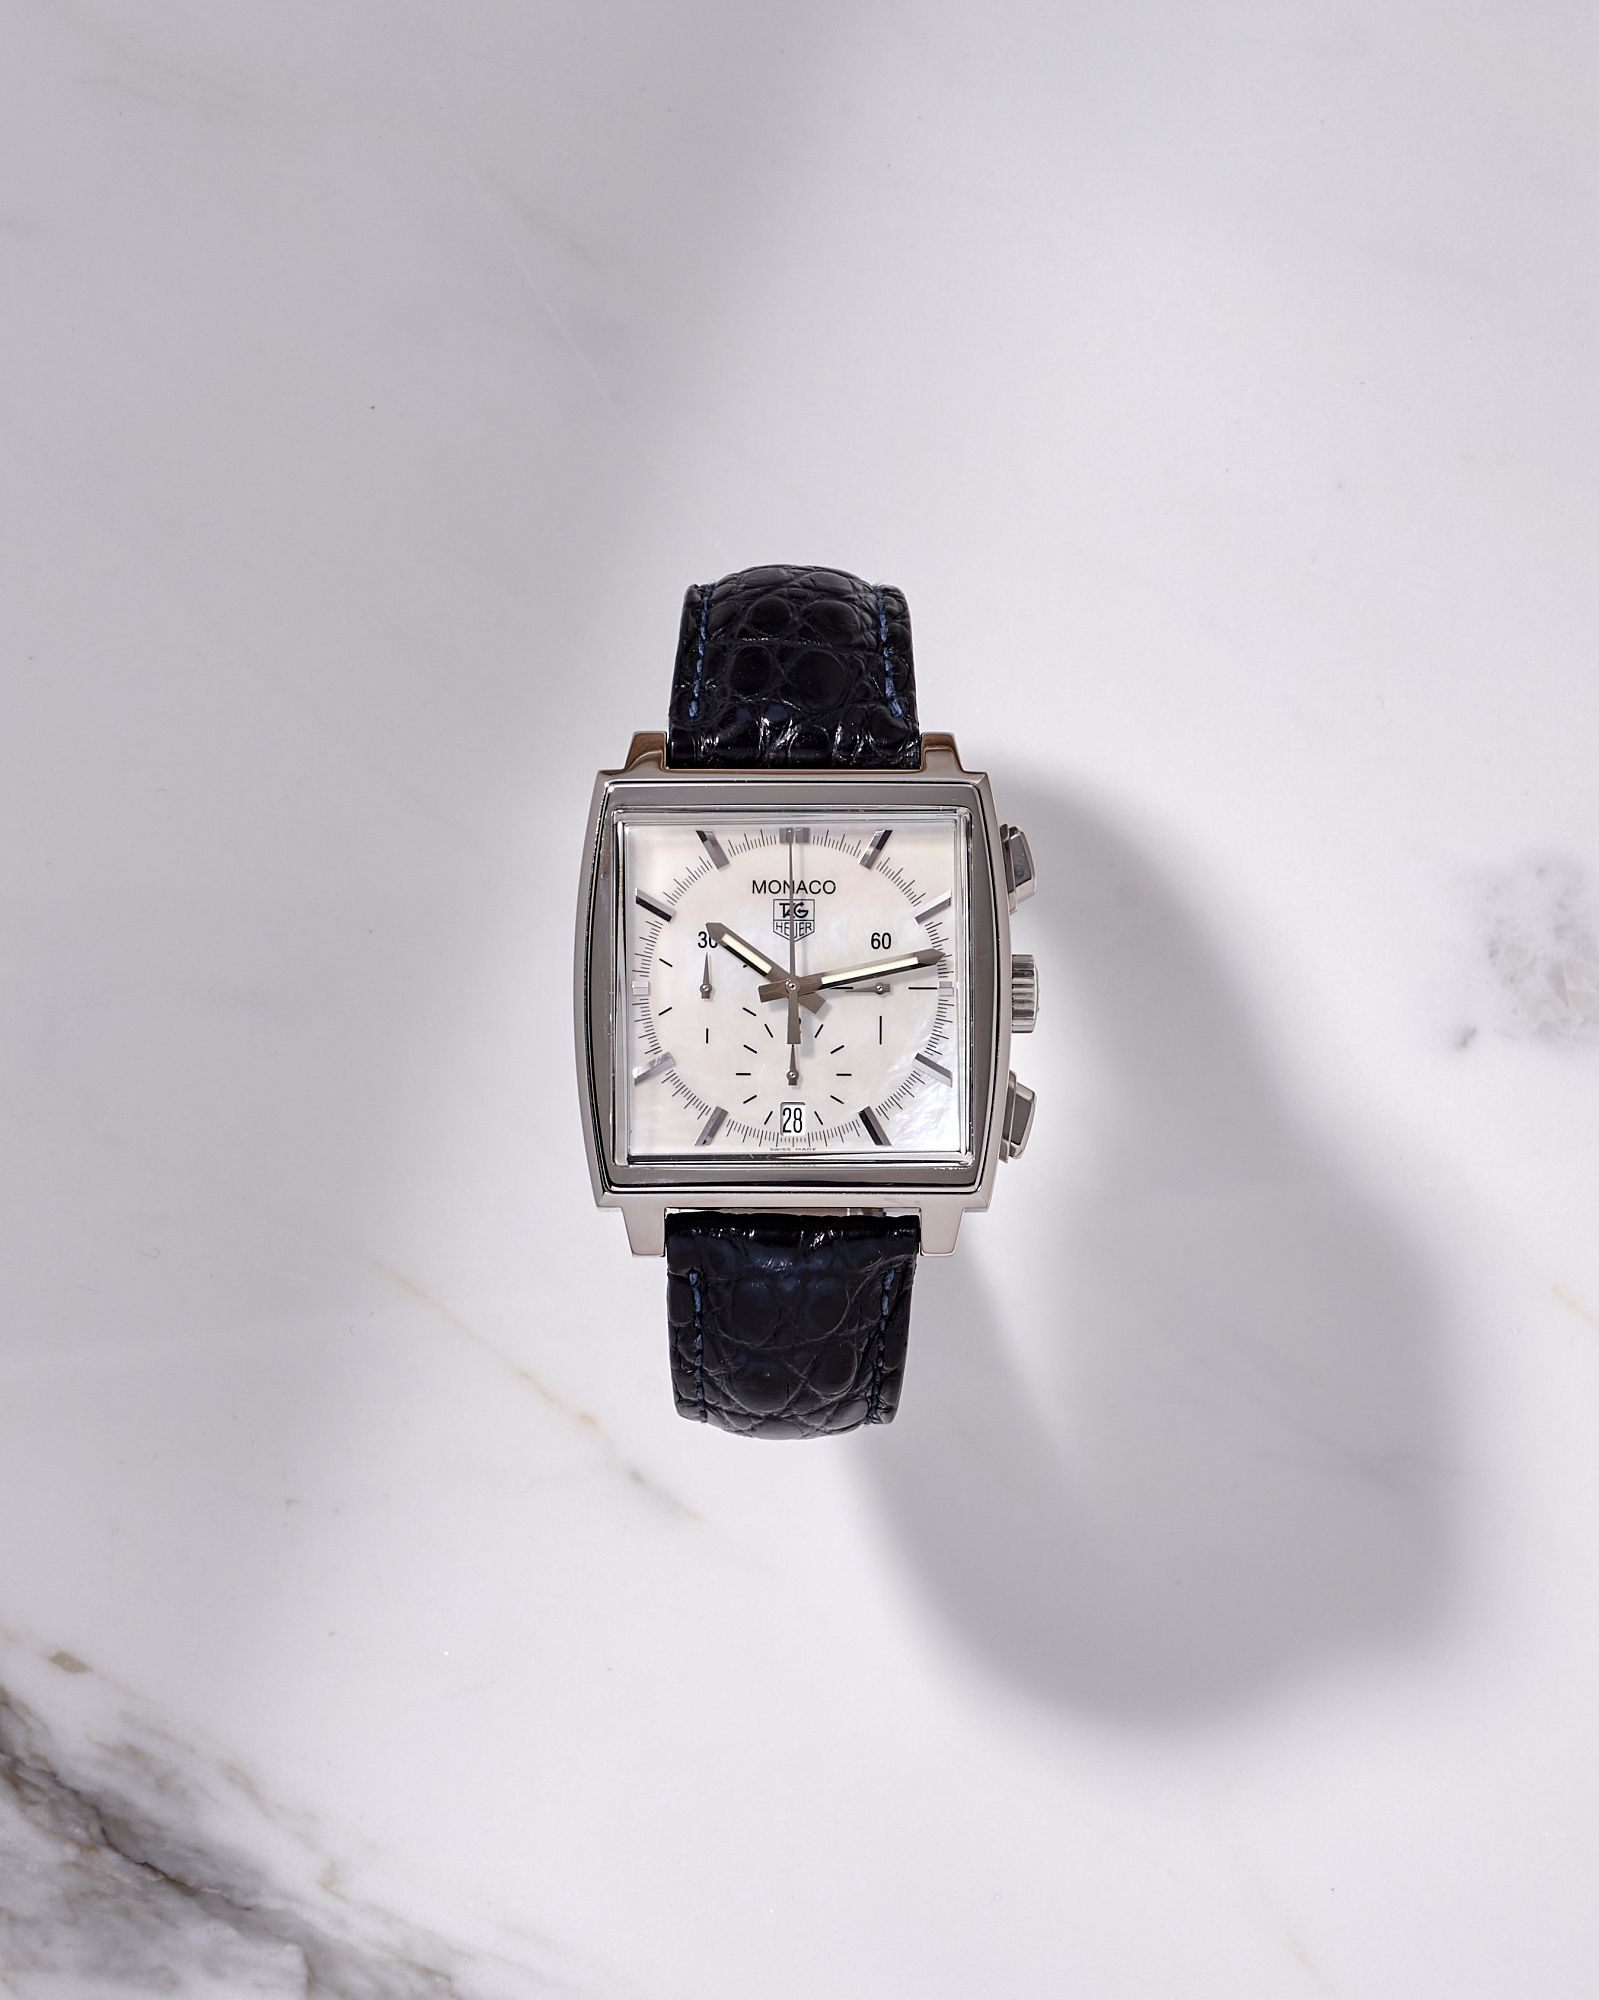 Tag Heuer Monaco Mother of Pearl 